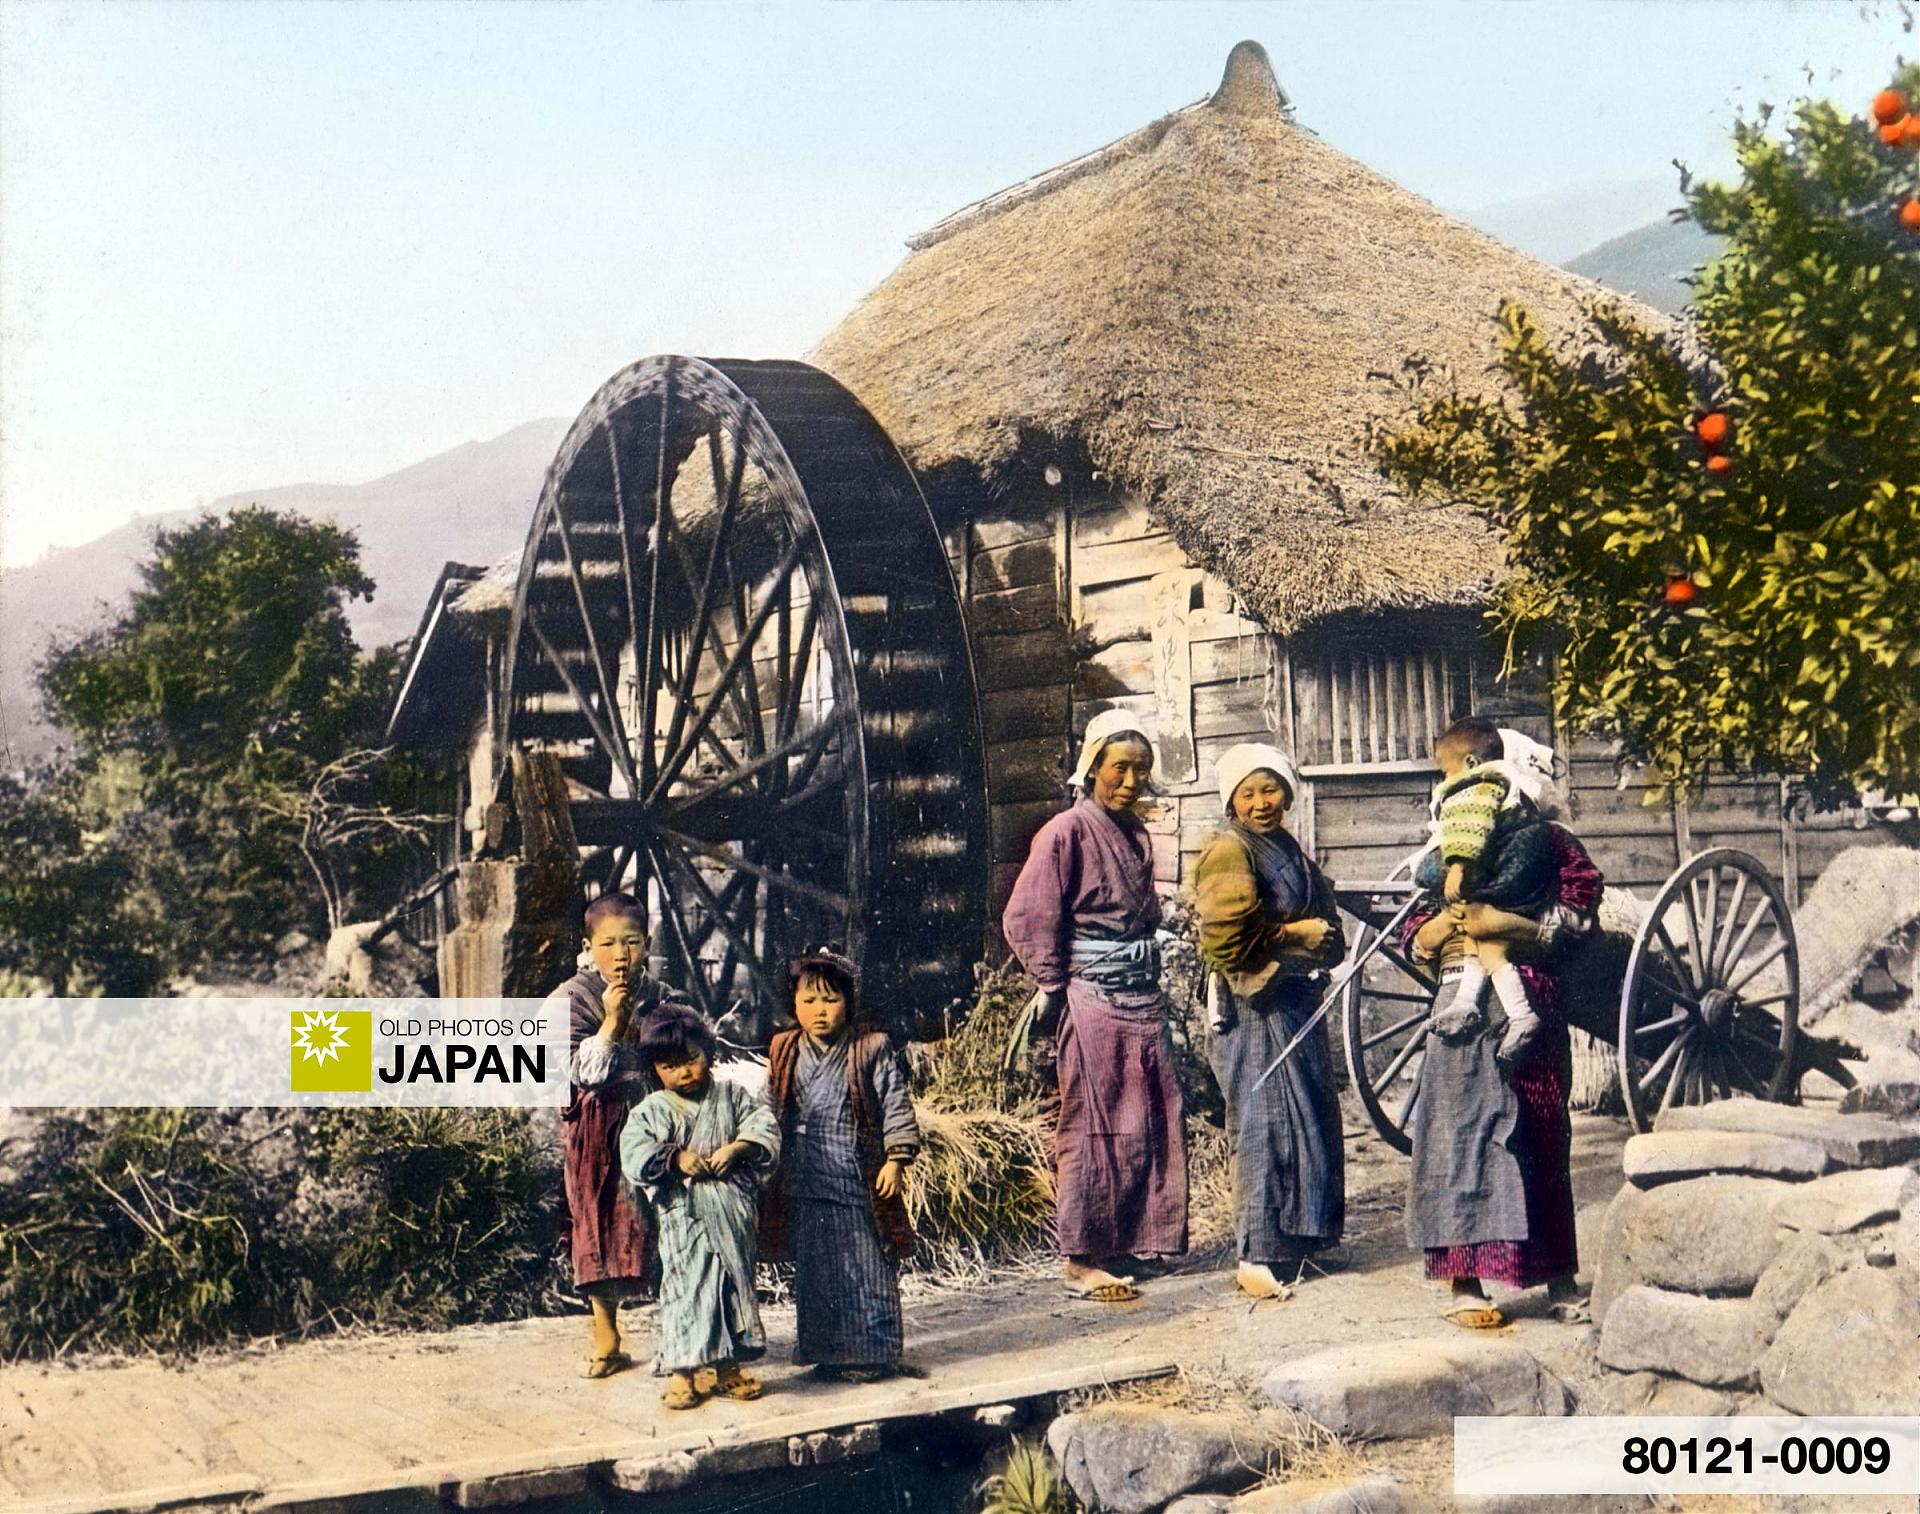 80121-0009 - Women and children in front of a Japanese grist mill, 1920s